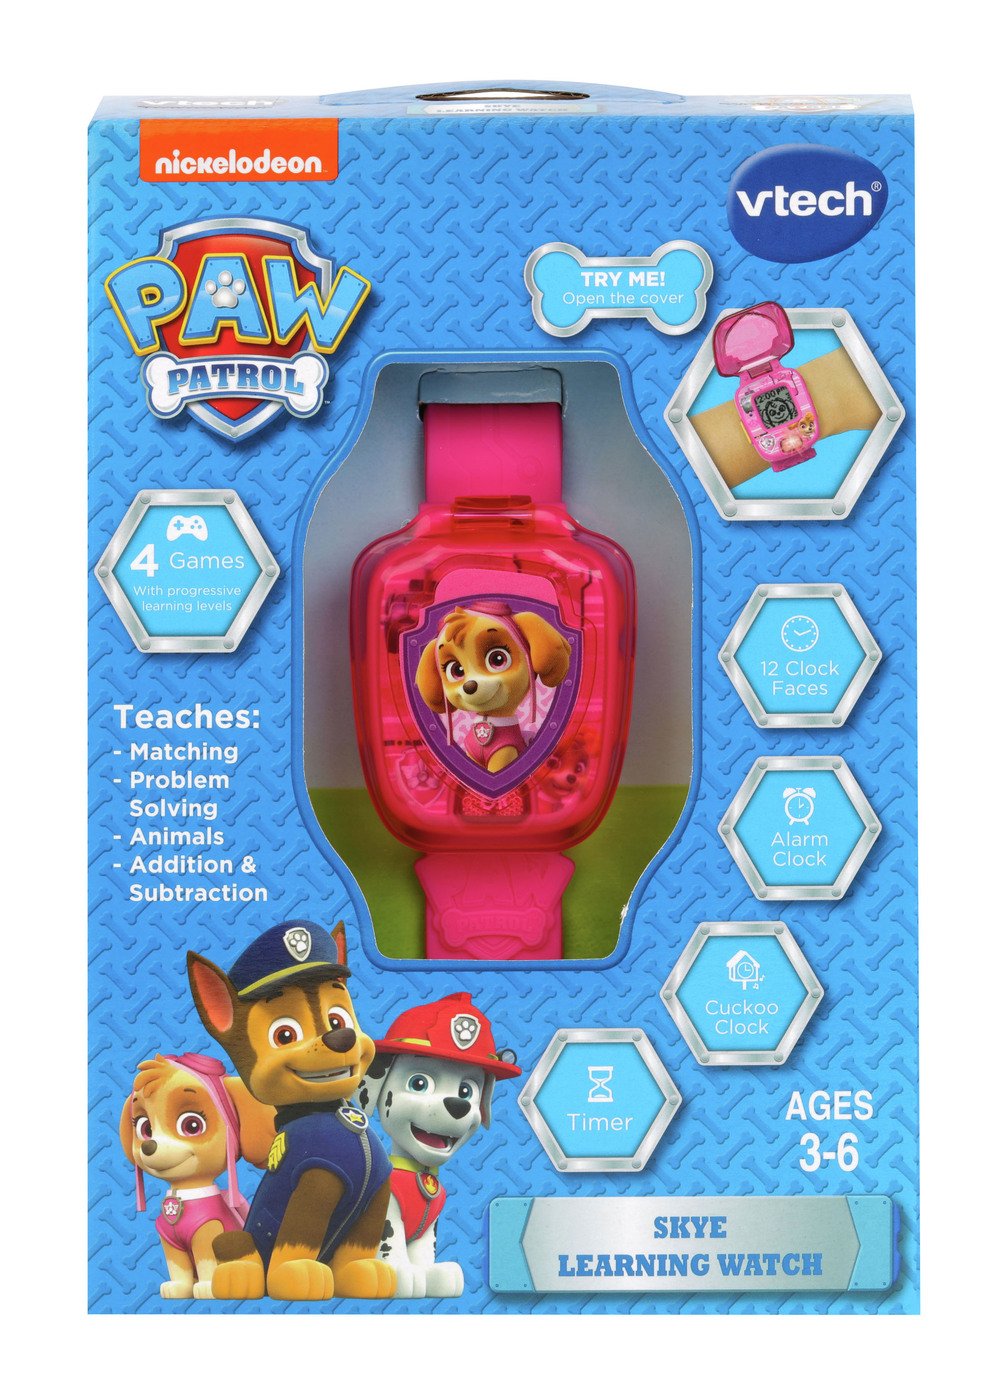 VTech PAW Patrol Syke Learning Watch Review